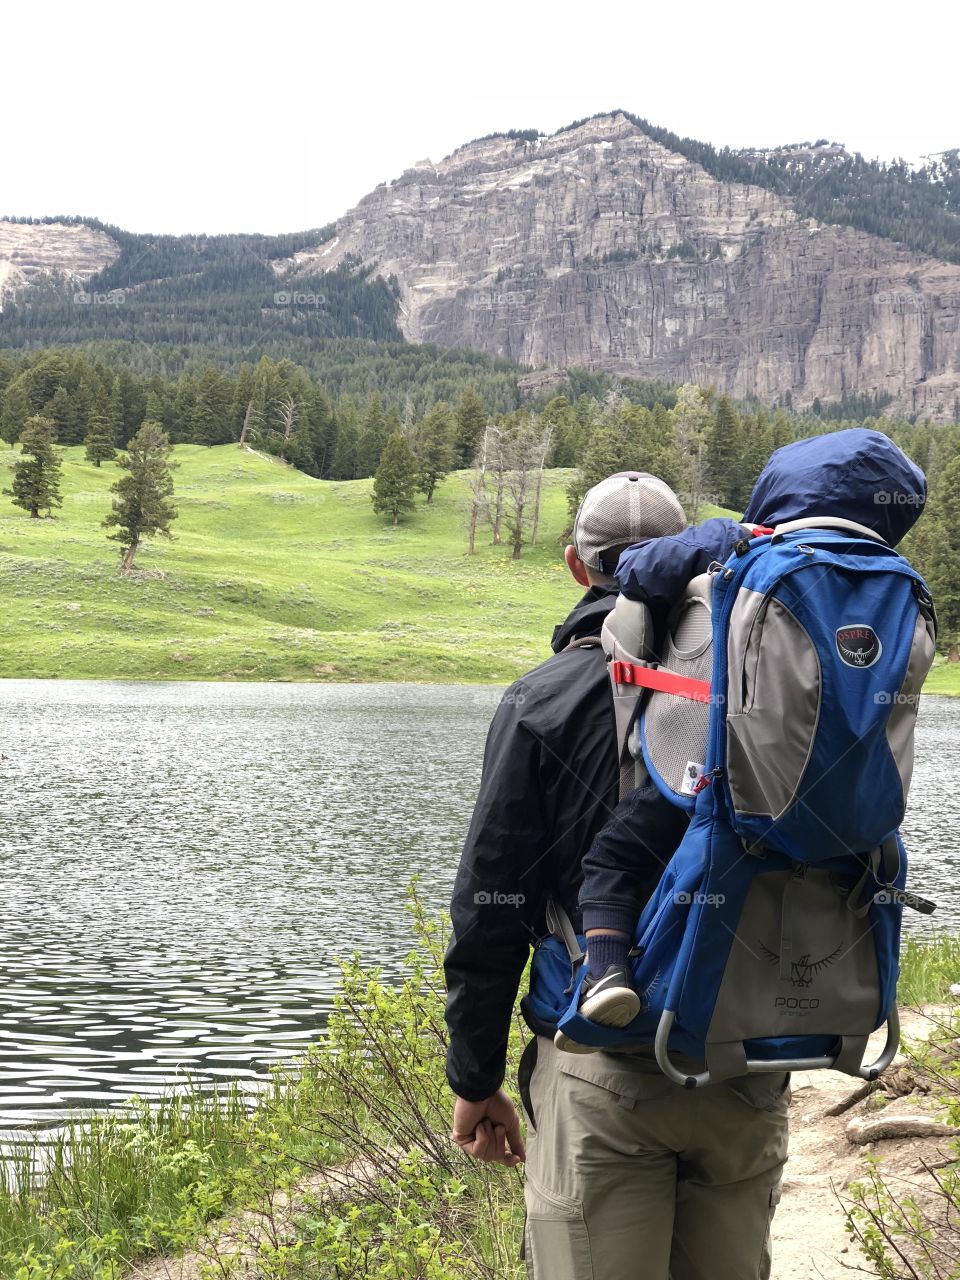 Dad and son backpacking in Yellowstone osprey backpack